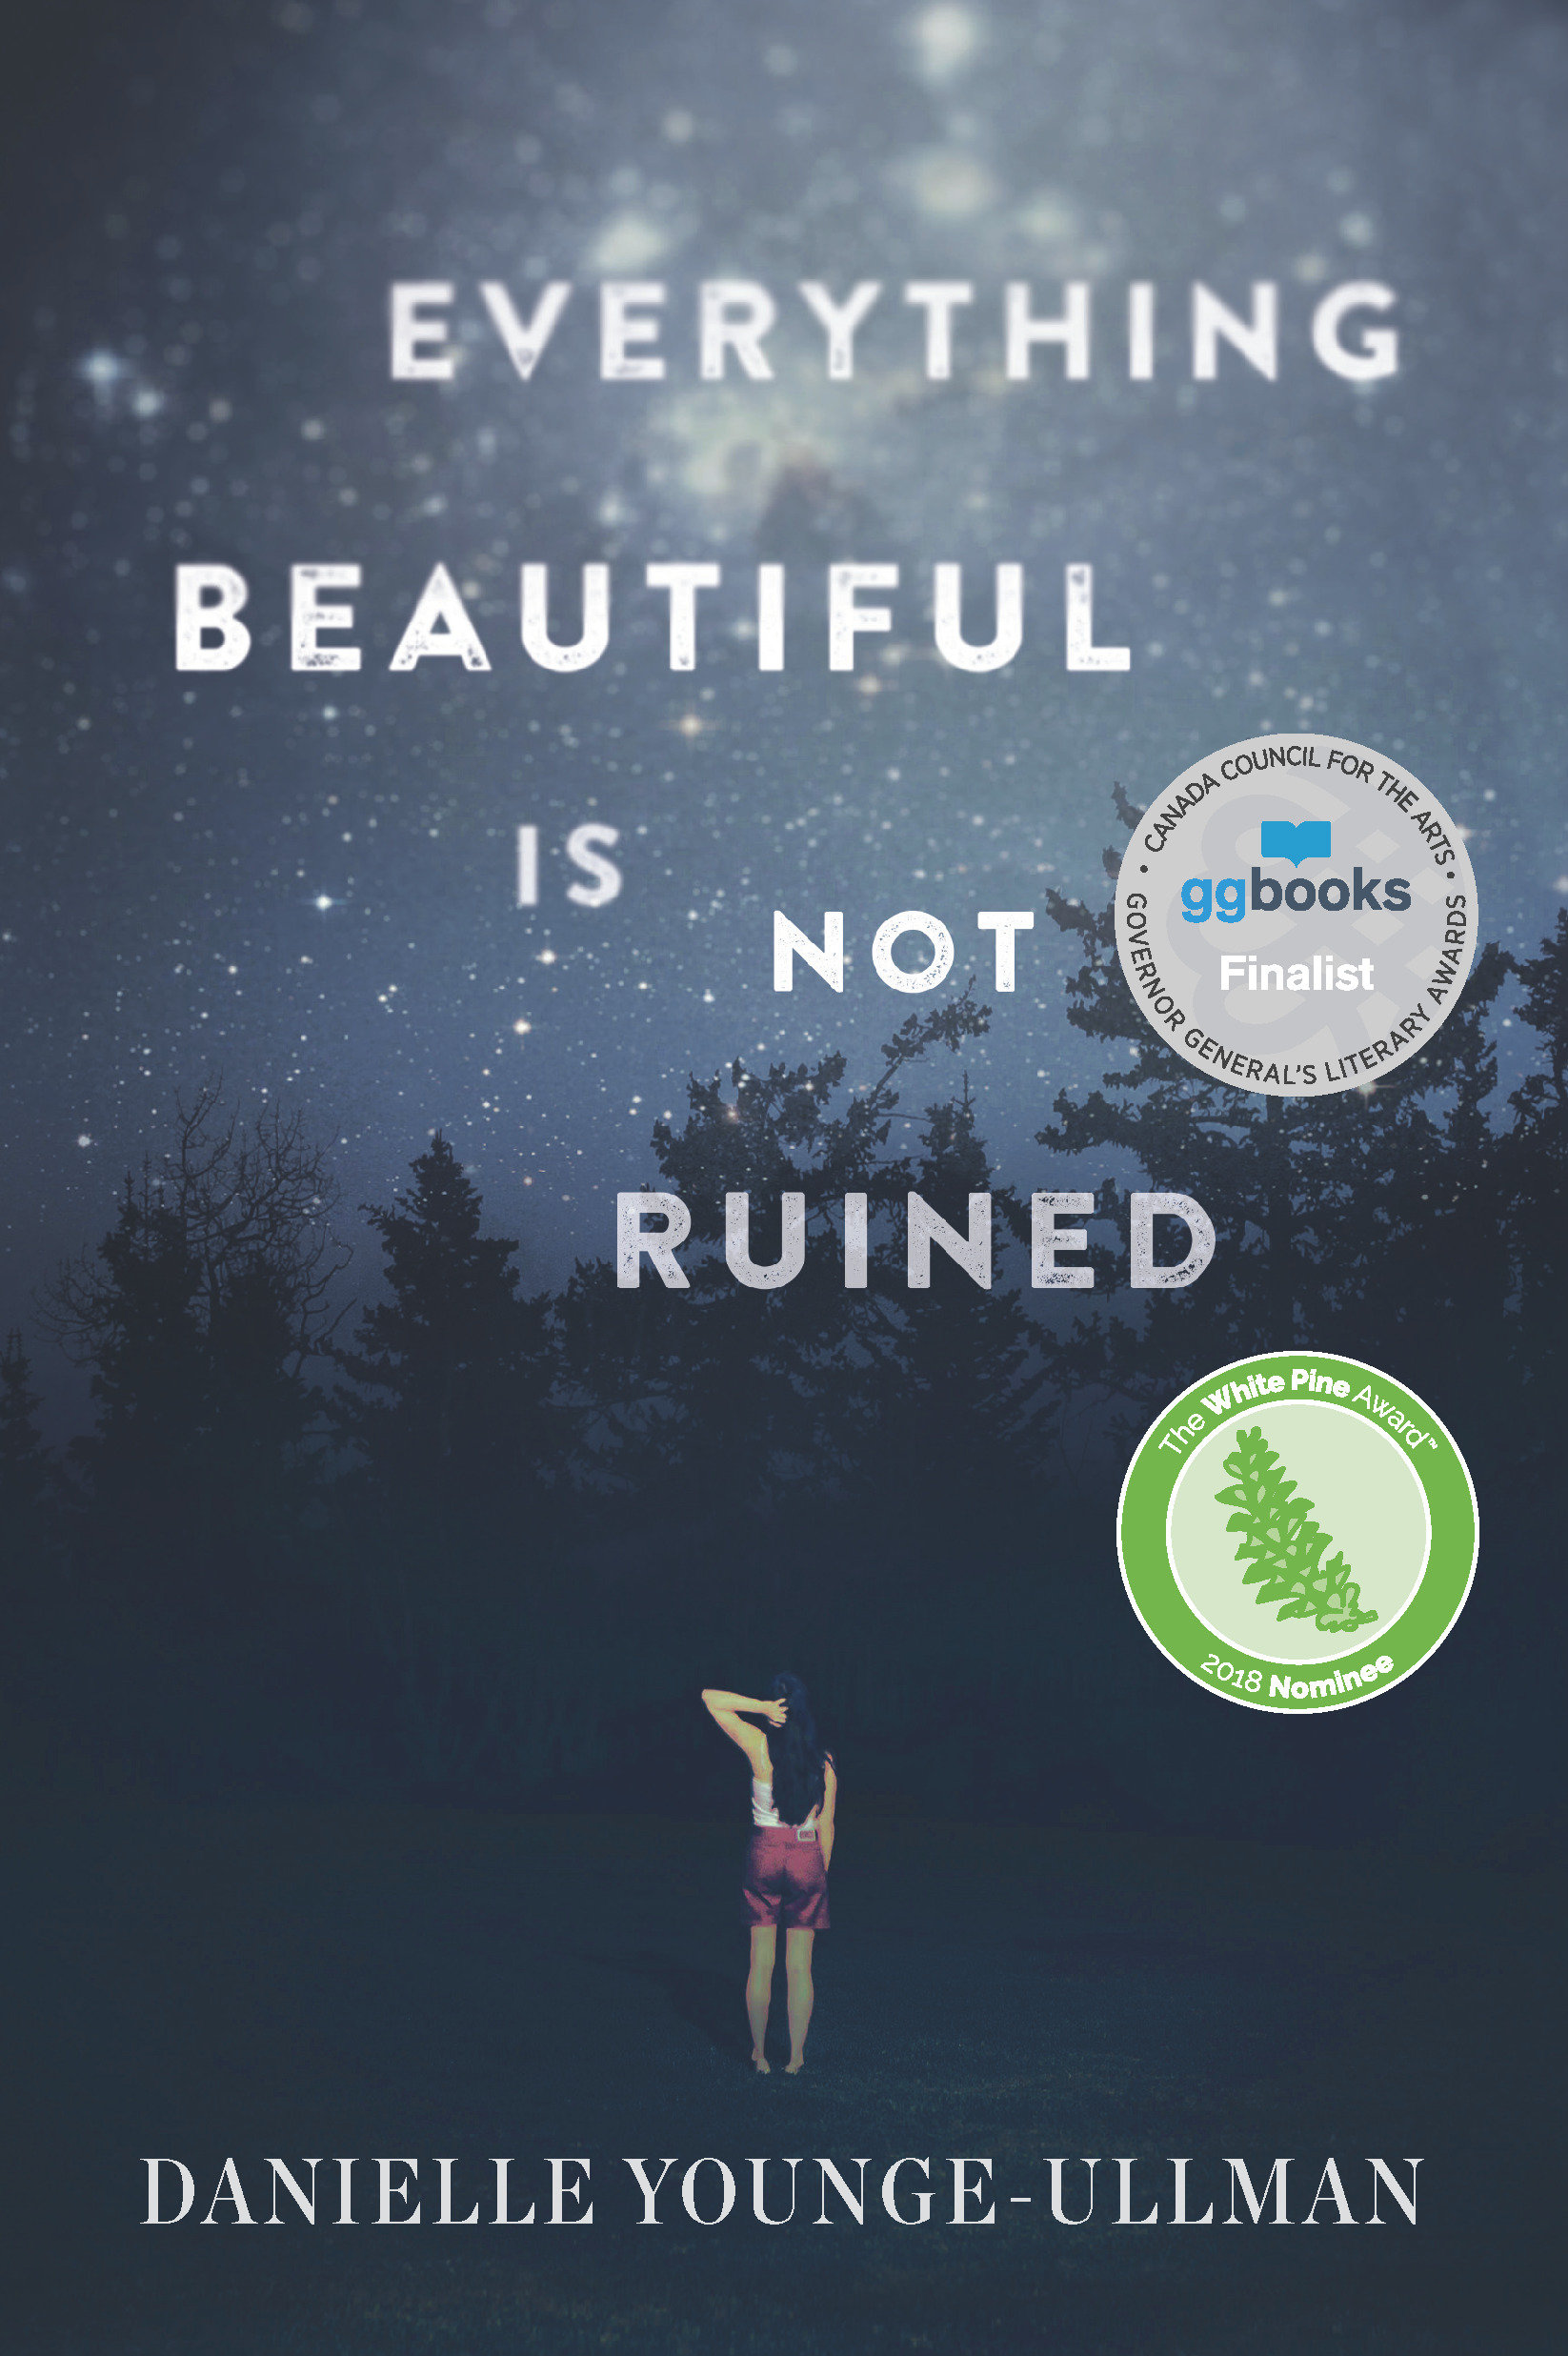 Cover Image of Everything Beautiful Is Not Ruined